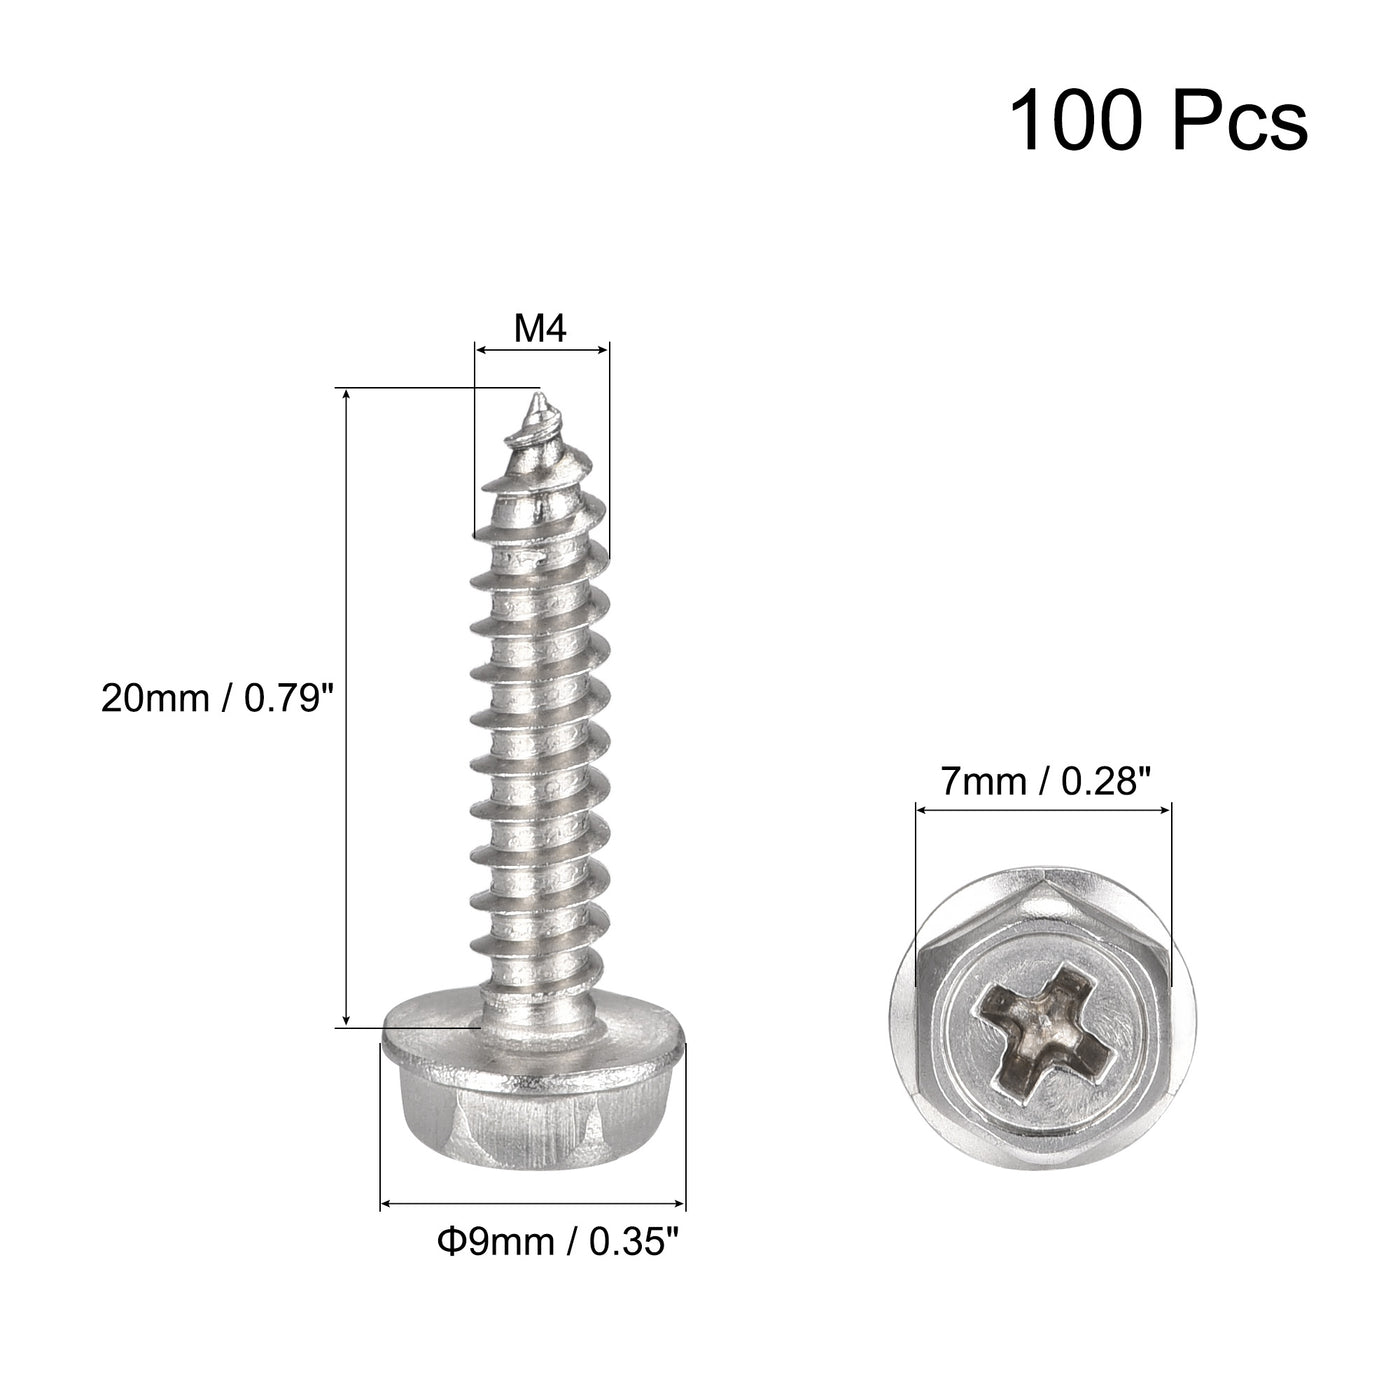 uxcell Uxcell Phillips Hex Washer Self Tapping Screws, M4 x 20mm 304 Stainless Steel Hex Flange Sheet Metal Screw 100pcs